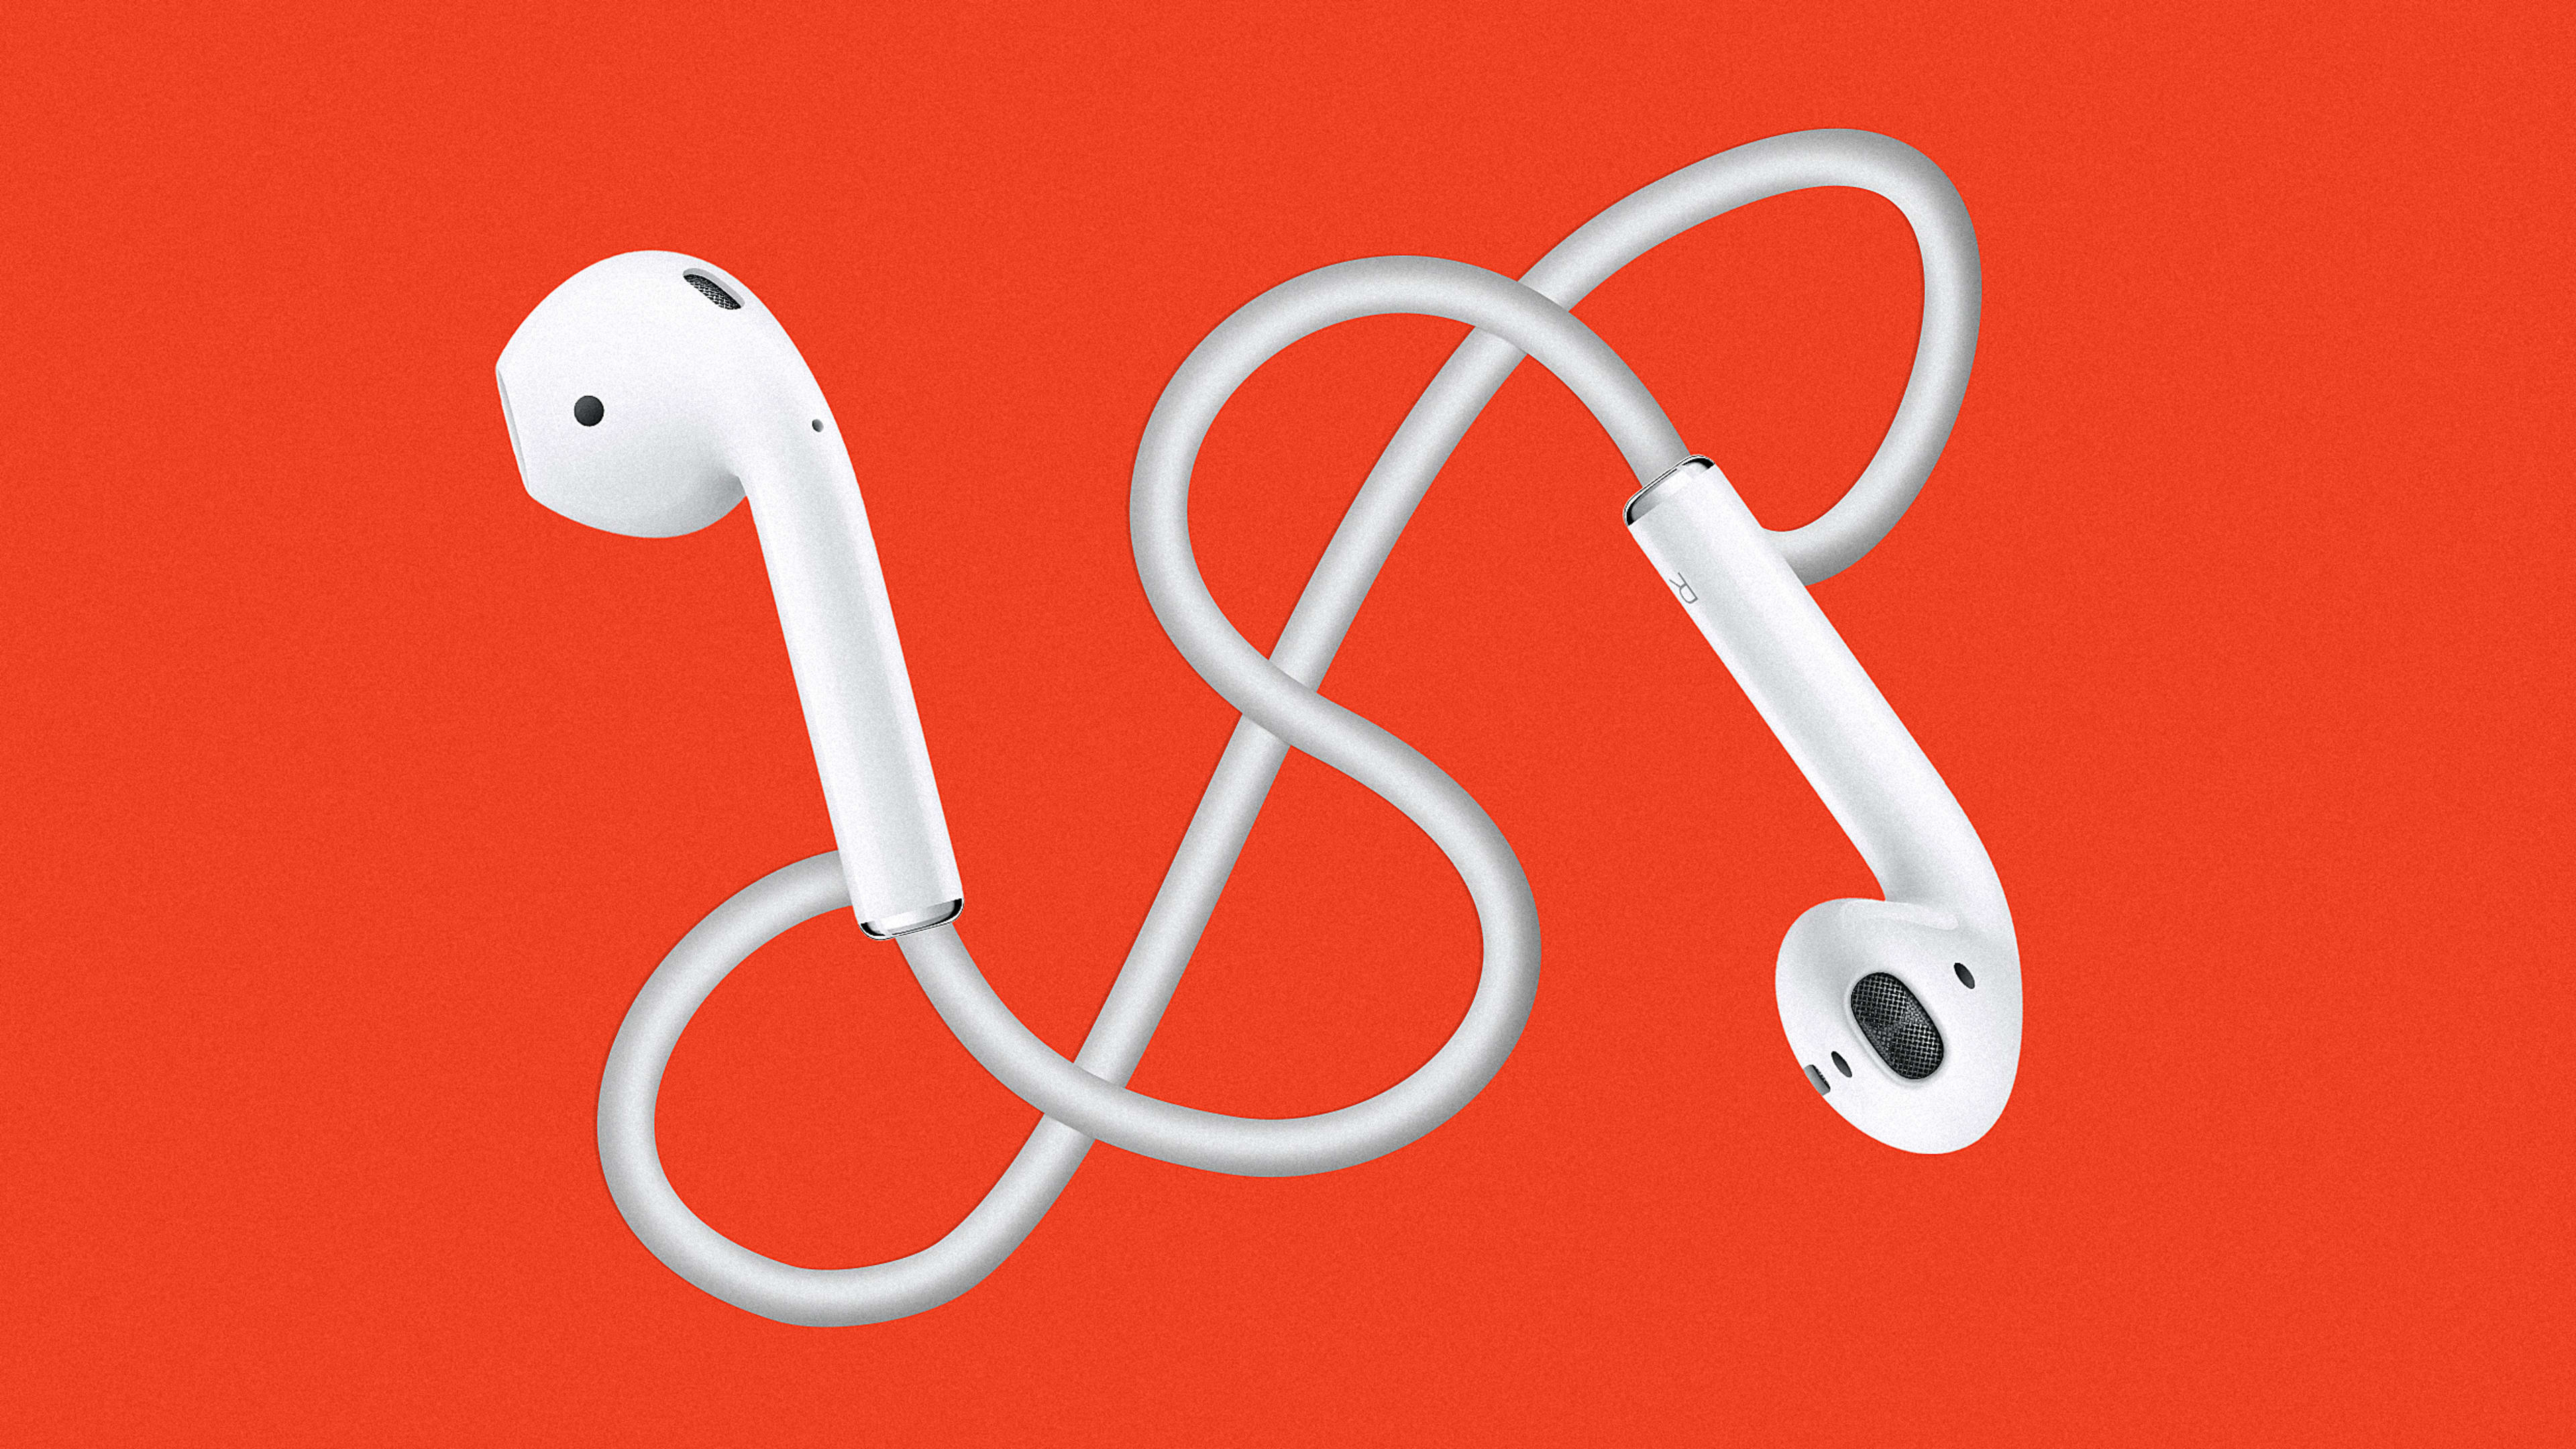 Retailers are selling $60 cords for Apple’s wireless Airpods